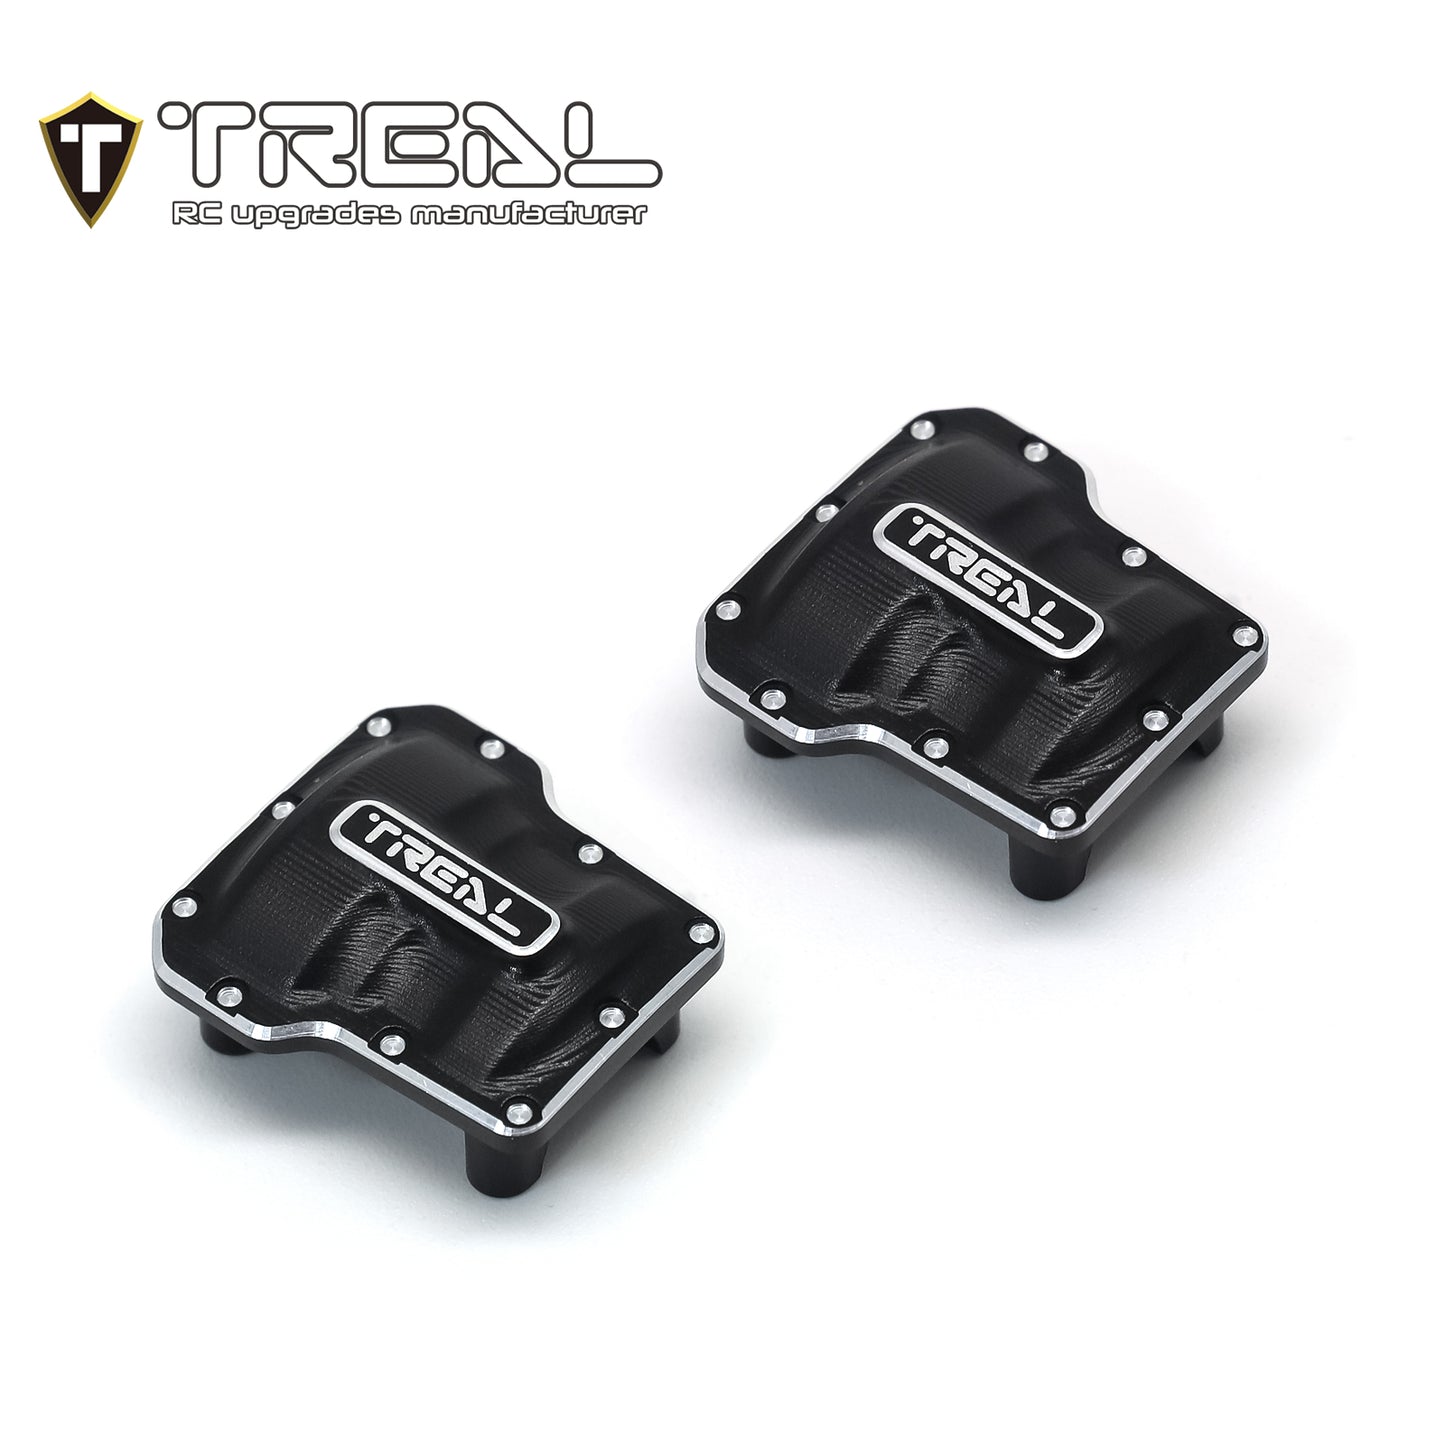 TREAL Aluminum 7075 Axle Diff Covers (2P) CNC Machined Upgrades for 1/18 TRX4M